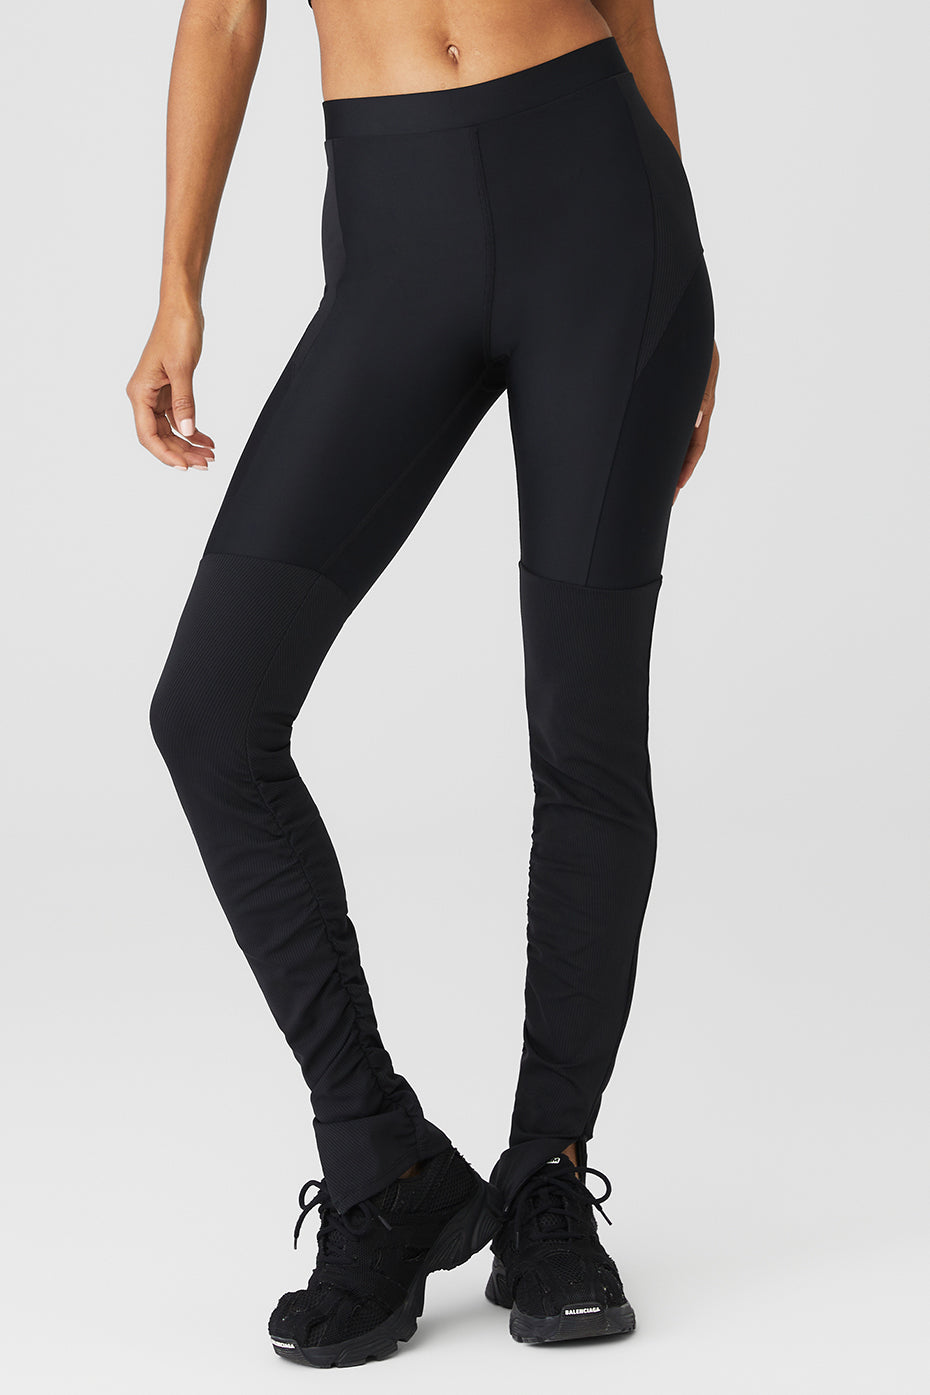 High waist leggings with pockets, pack of grey + black, Adidas Performance